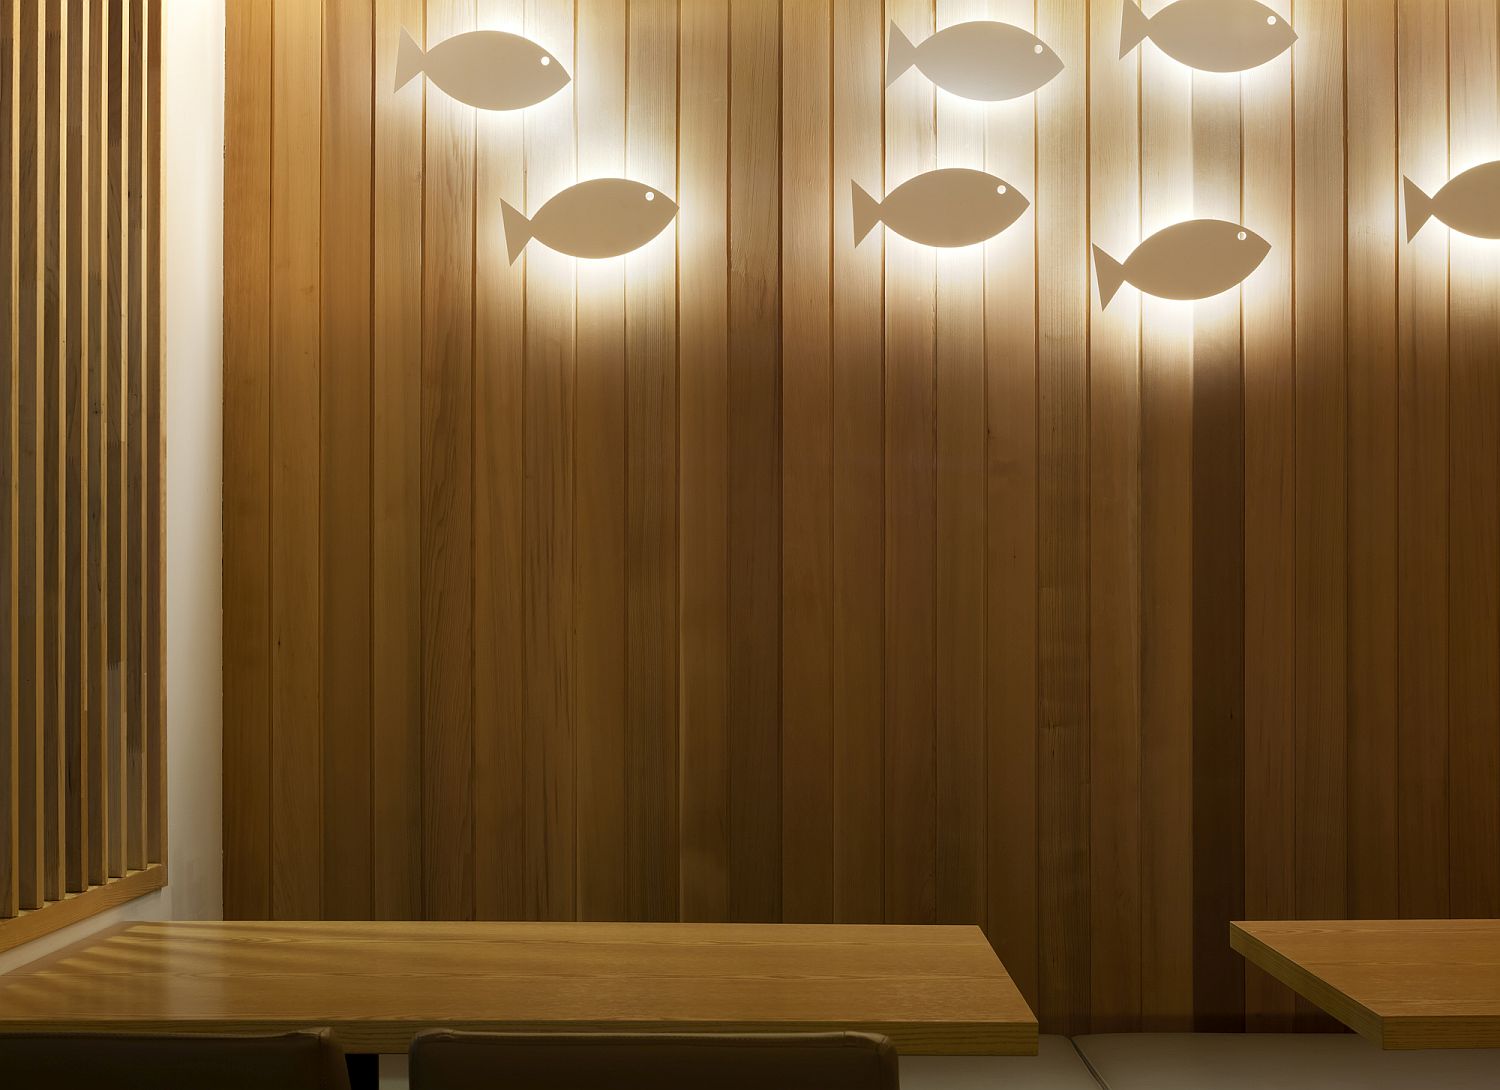 Red cedar and bright lighting give the interior a cheerful look